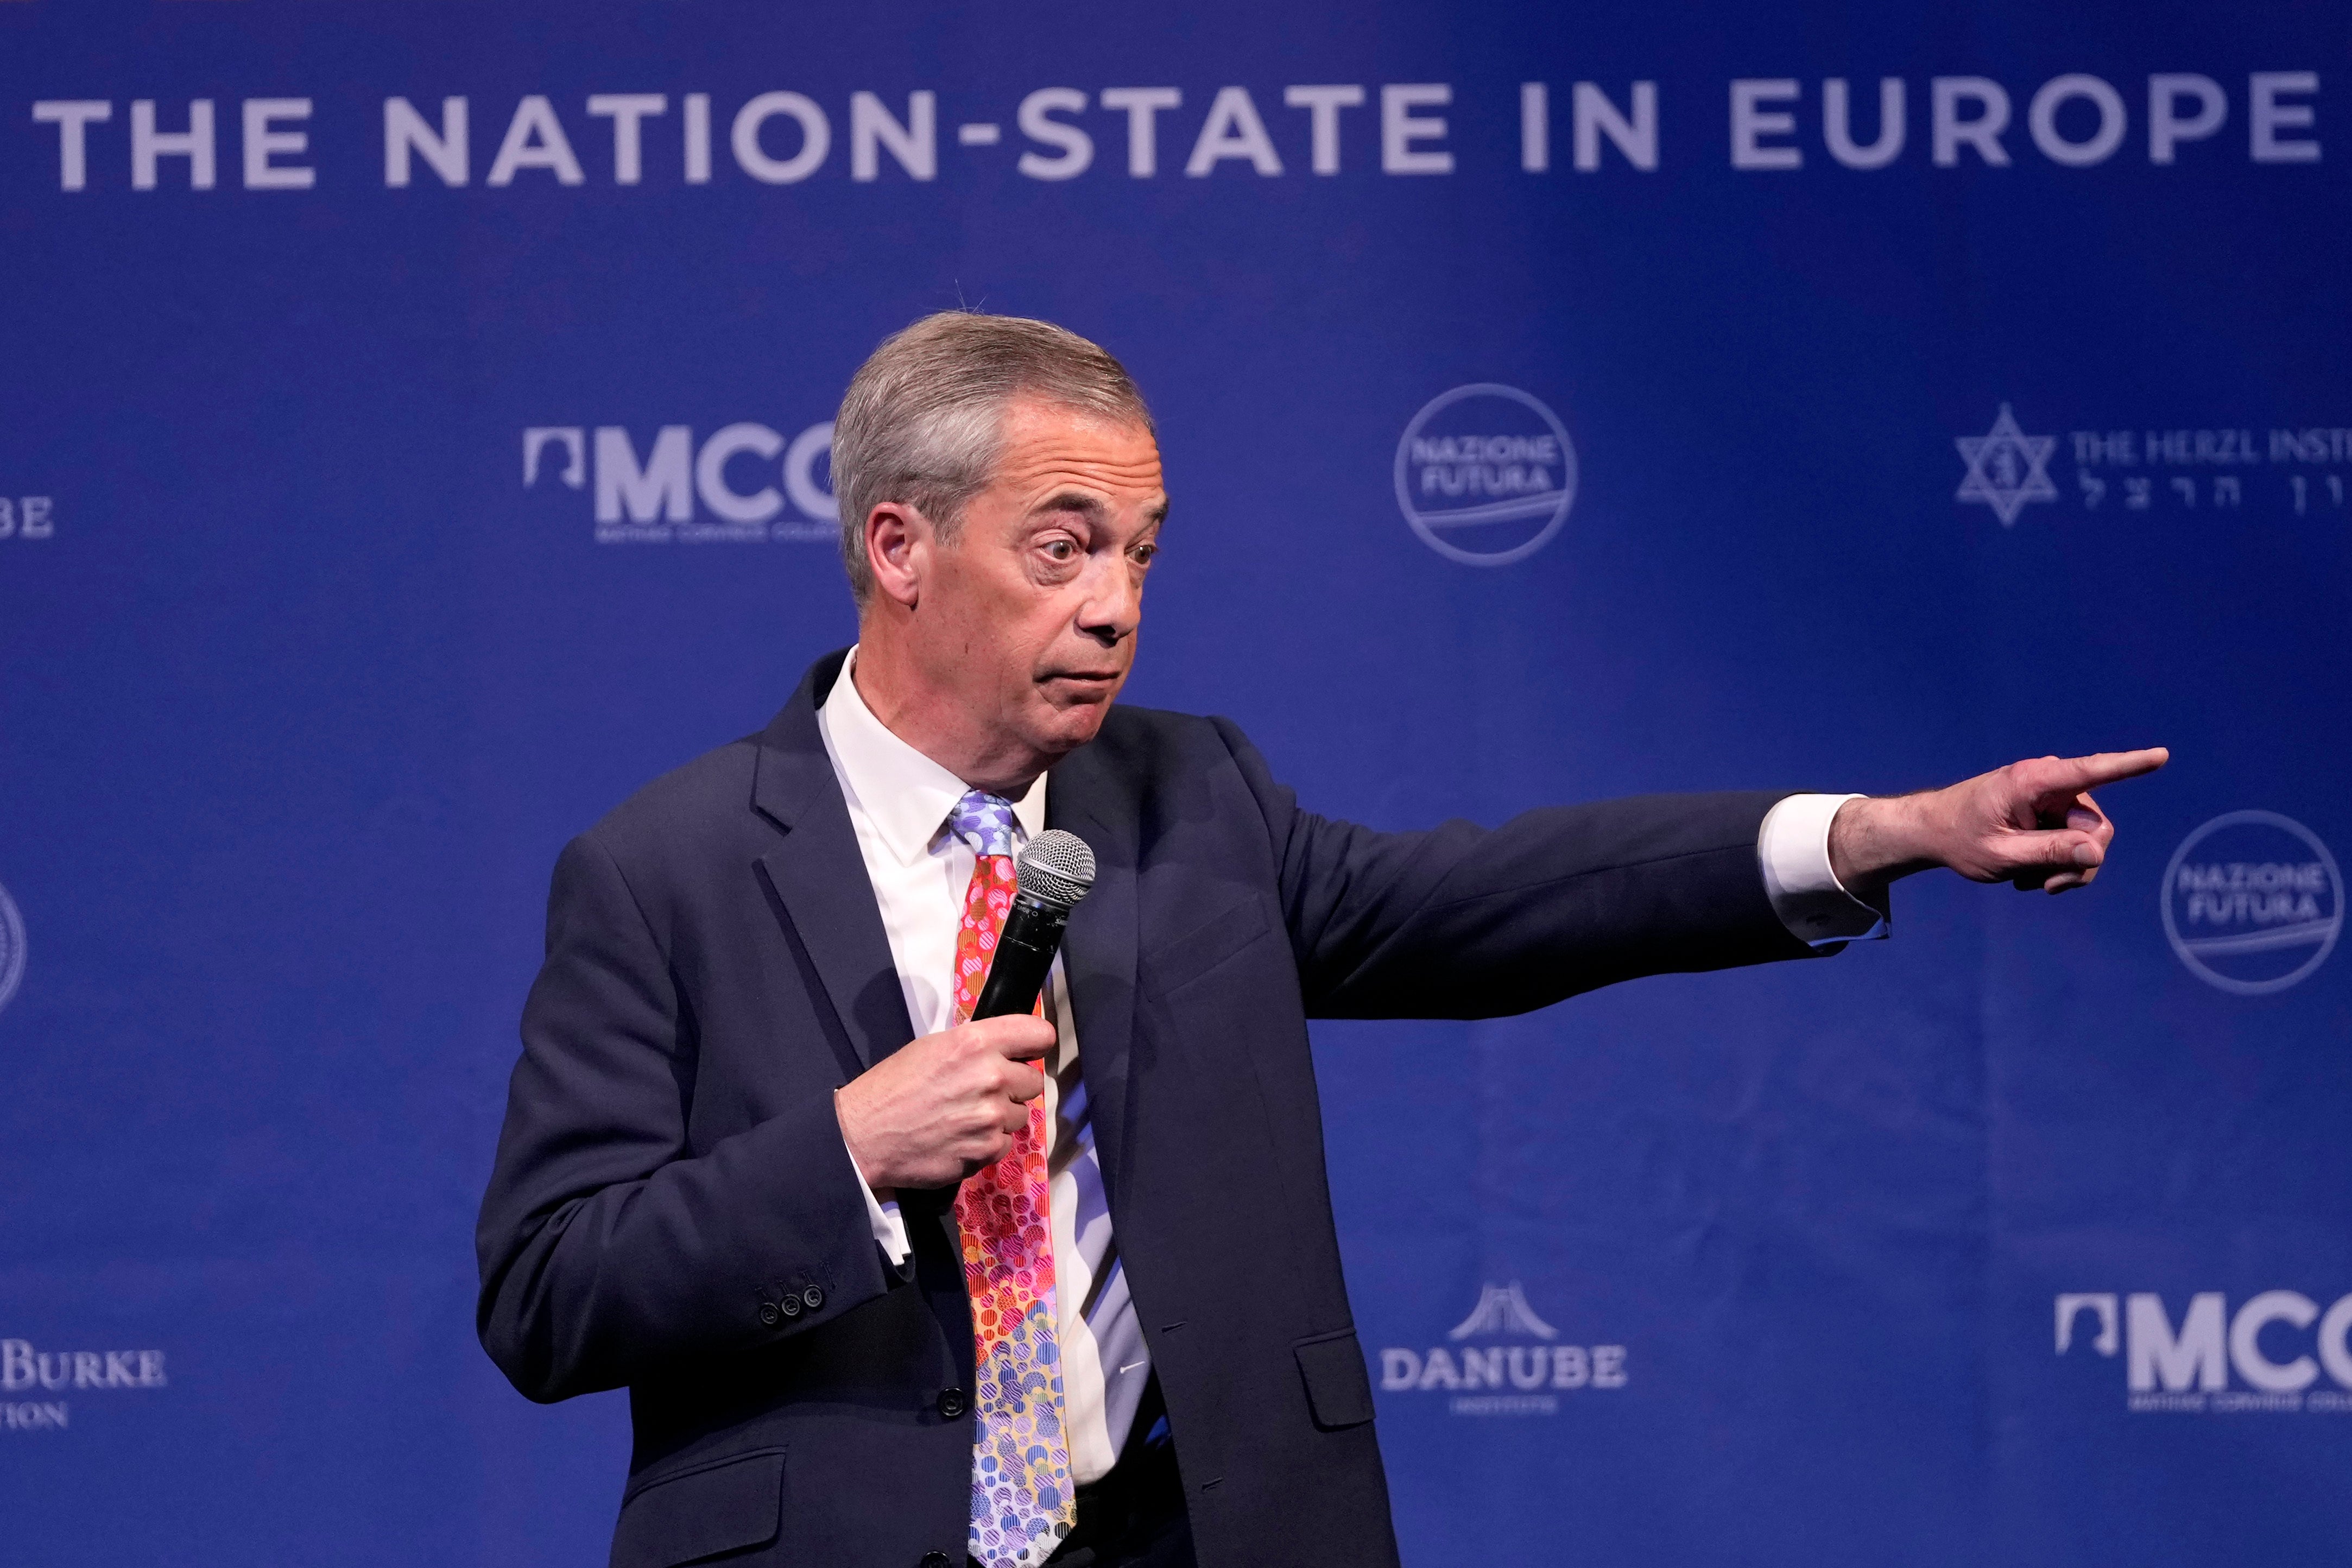 Nigel Farage will instead focus on Donald Trump’s bid to return to the White House